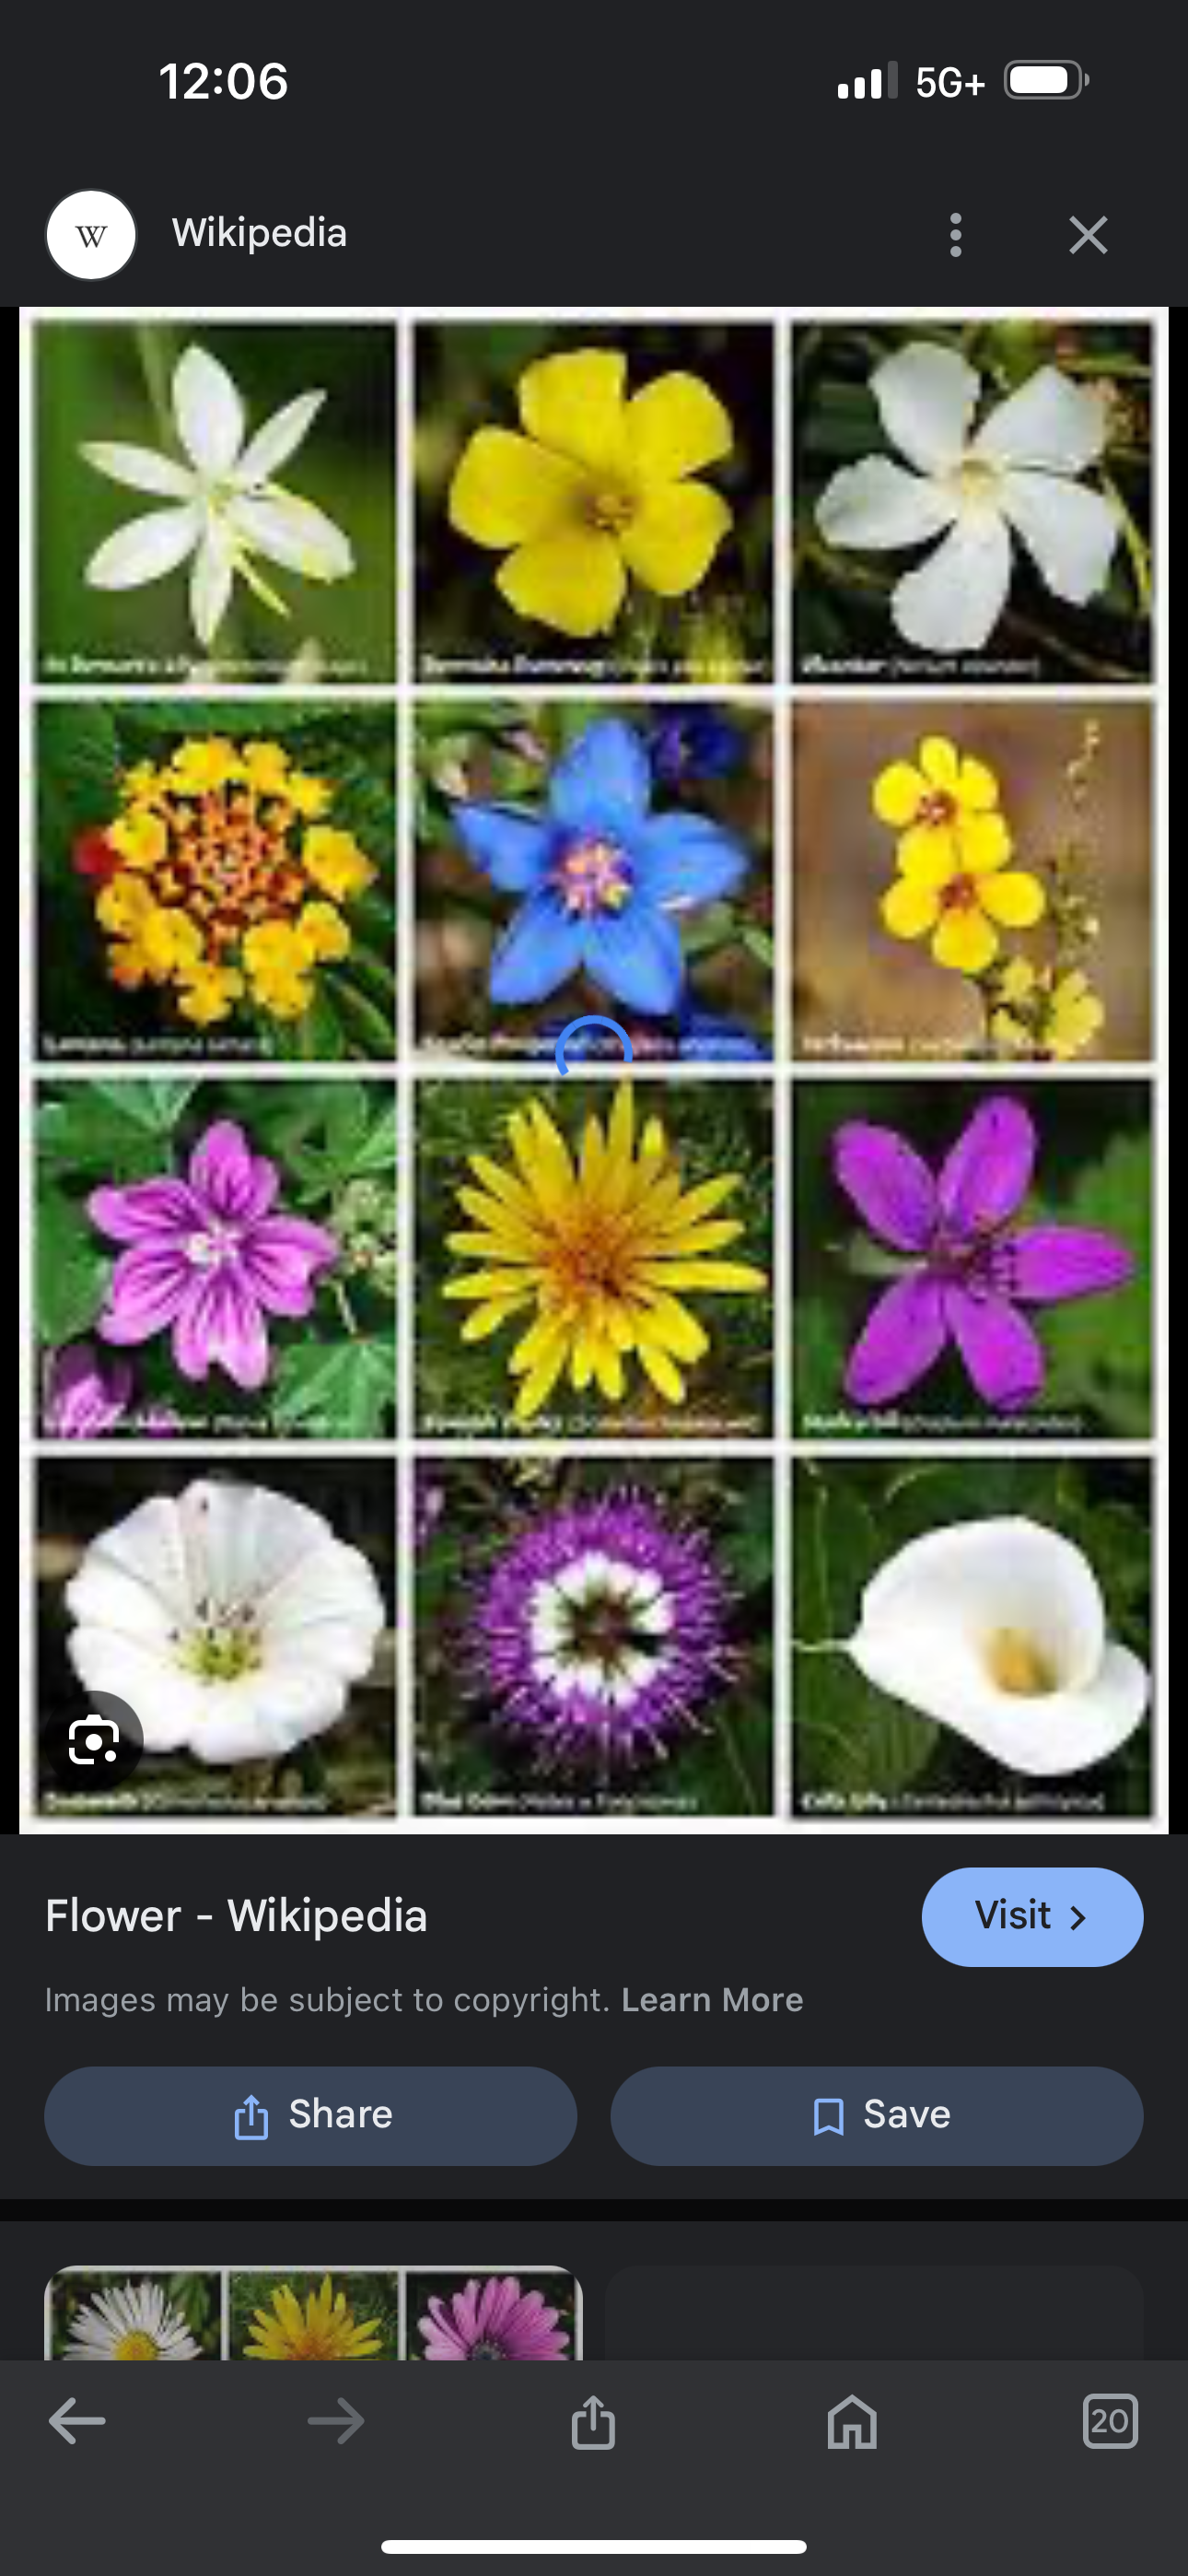 <p>Flowering plants 90% Of all plants species are angiosperms Three main parts</p><p>1. Flower-specialized structure that produce pollen</p><ol start="2"><li><p>Fruit- the main ovary of flowering plants that contain seeds</p></li><li><p>Cotyledon- Stores food by growing embryo</p></li></ol>